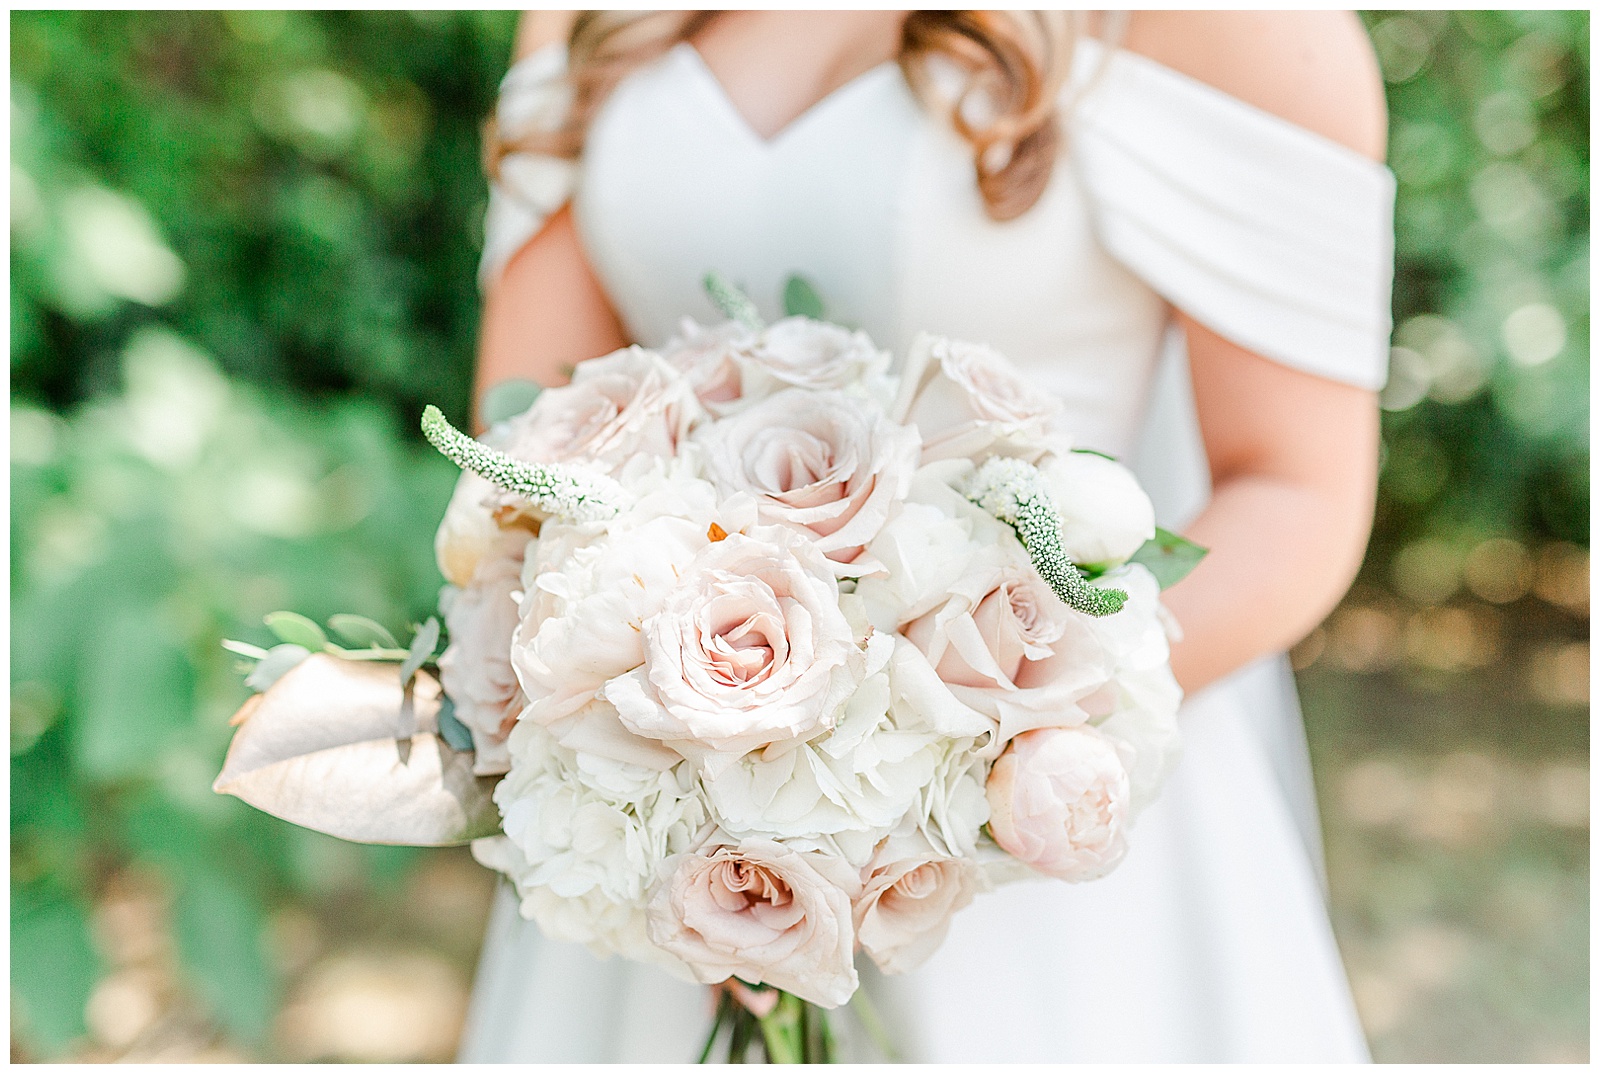 Gorgeous Pastel Rose Bouquet from Summer Wedding in Charlotte, NC | check out the full wedding at KevynDixonPhoto.com